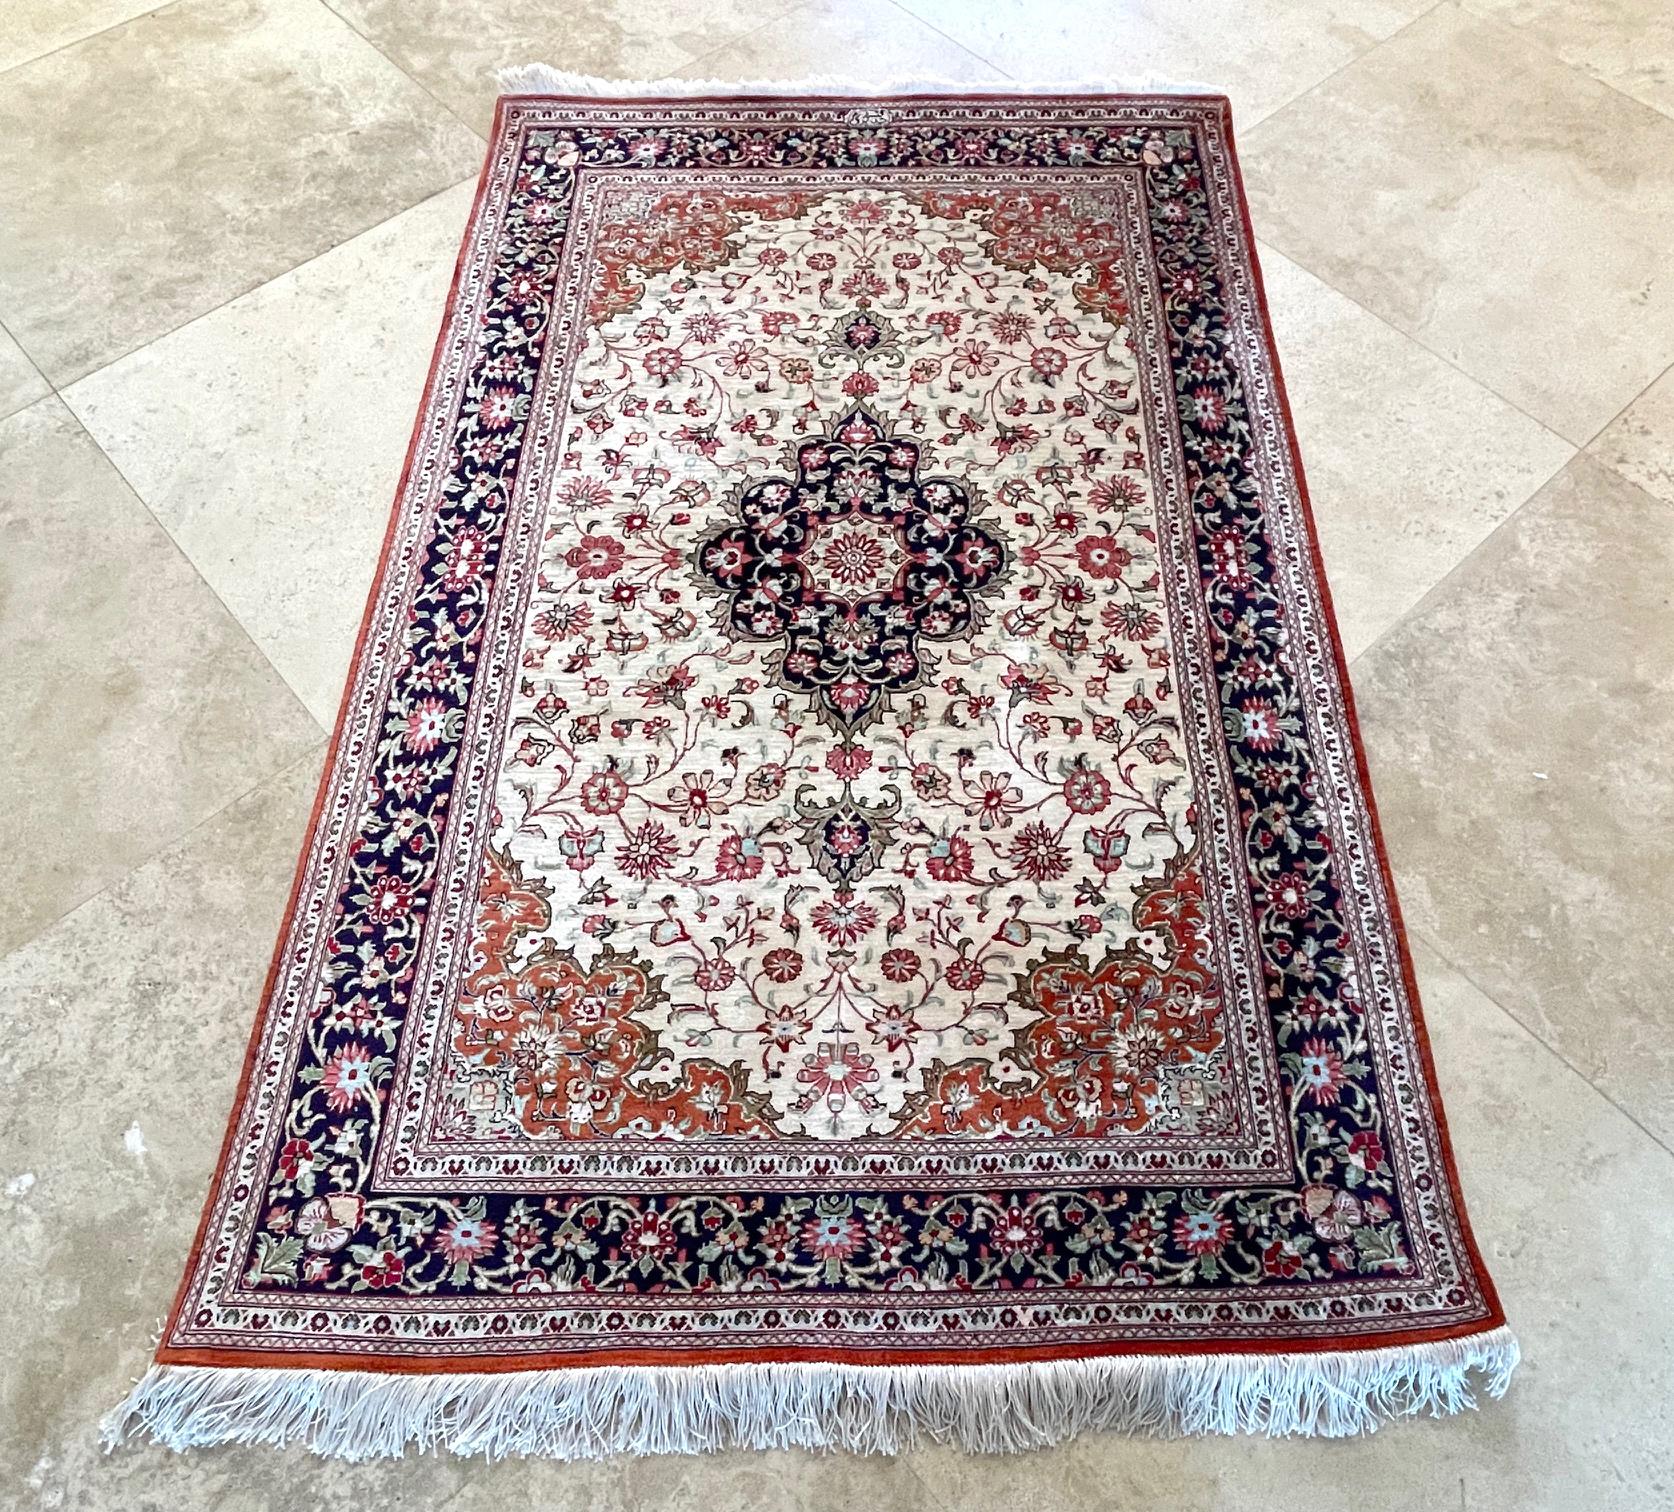 This authentic rug is from Qum, Iran which has been a rug weaving center in the past 100 years with high quality and expensive handmade rug. This stunning piece has silk pile and silk foundation with an excellent quality. The color combination in